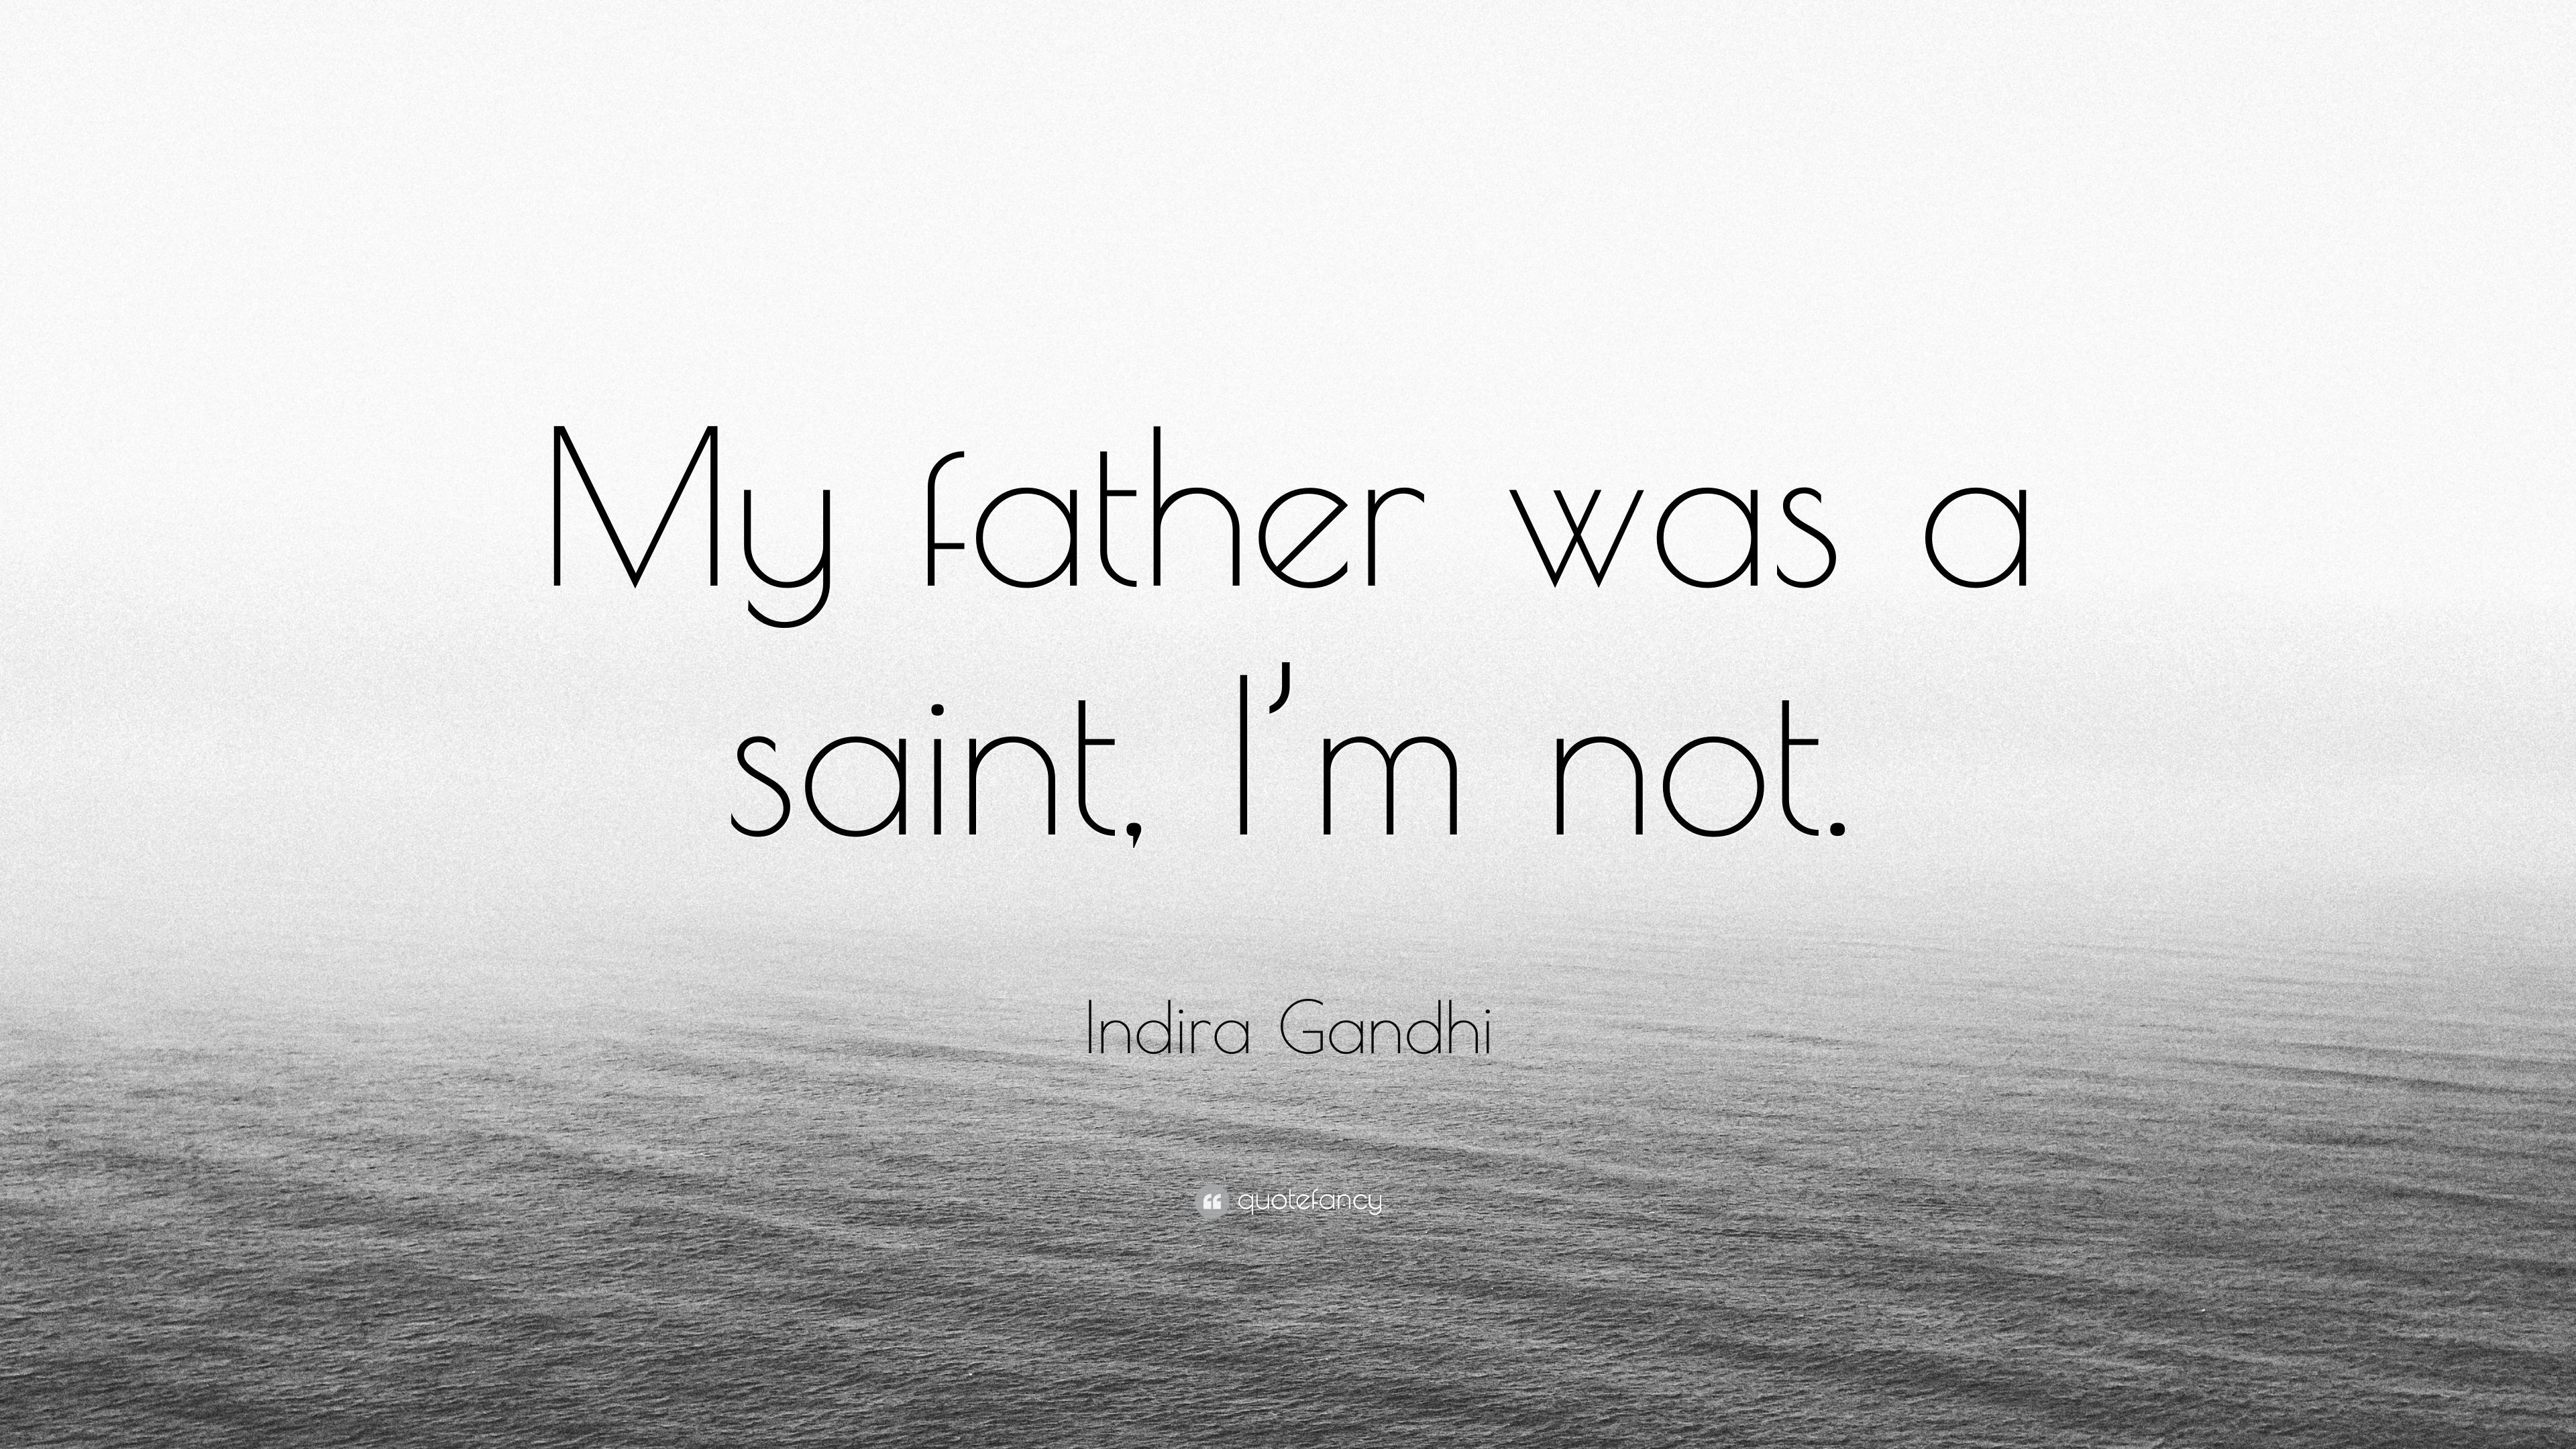 Indira Gandhi Quote: “My father was a saint, I'm not.” 7